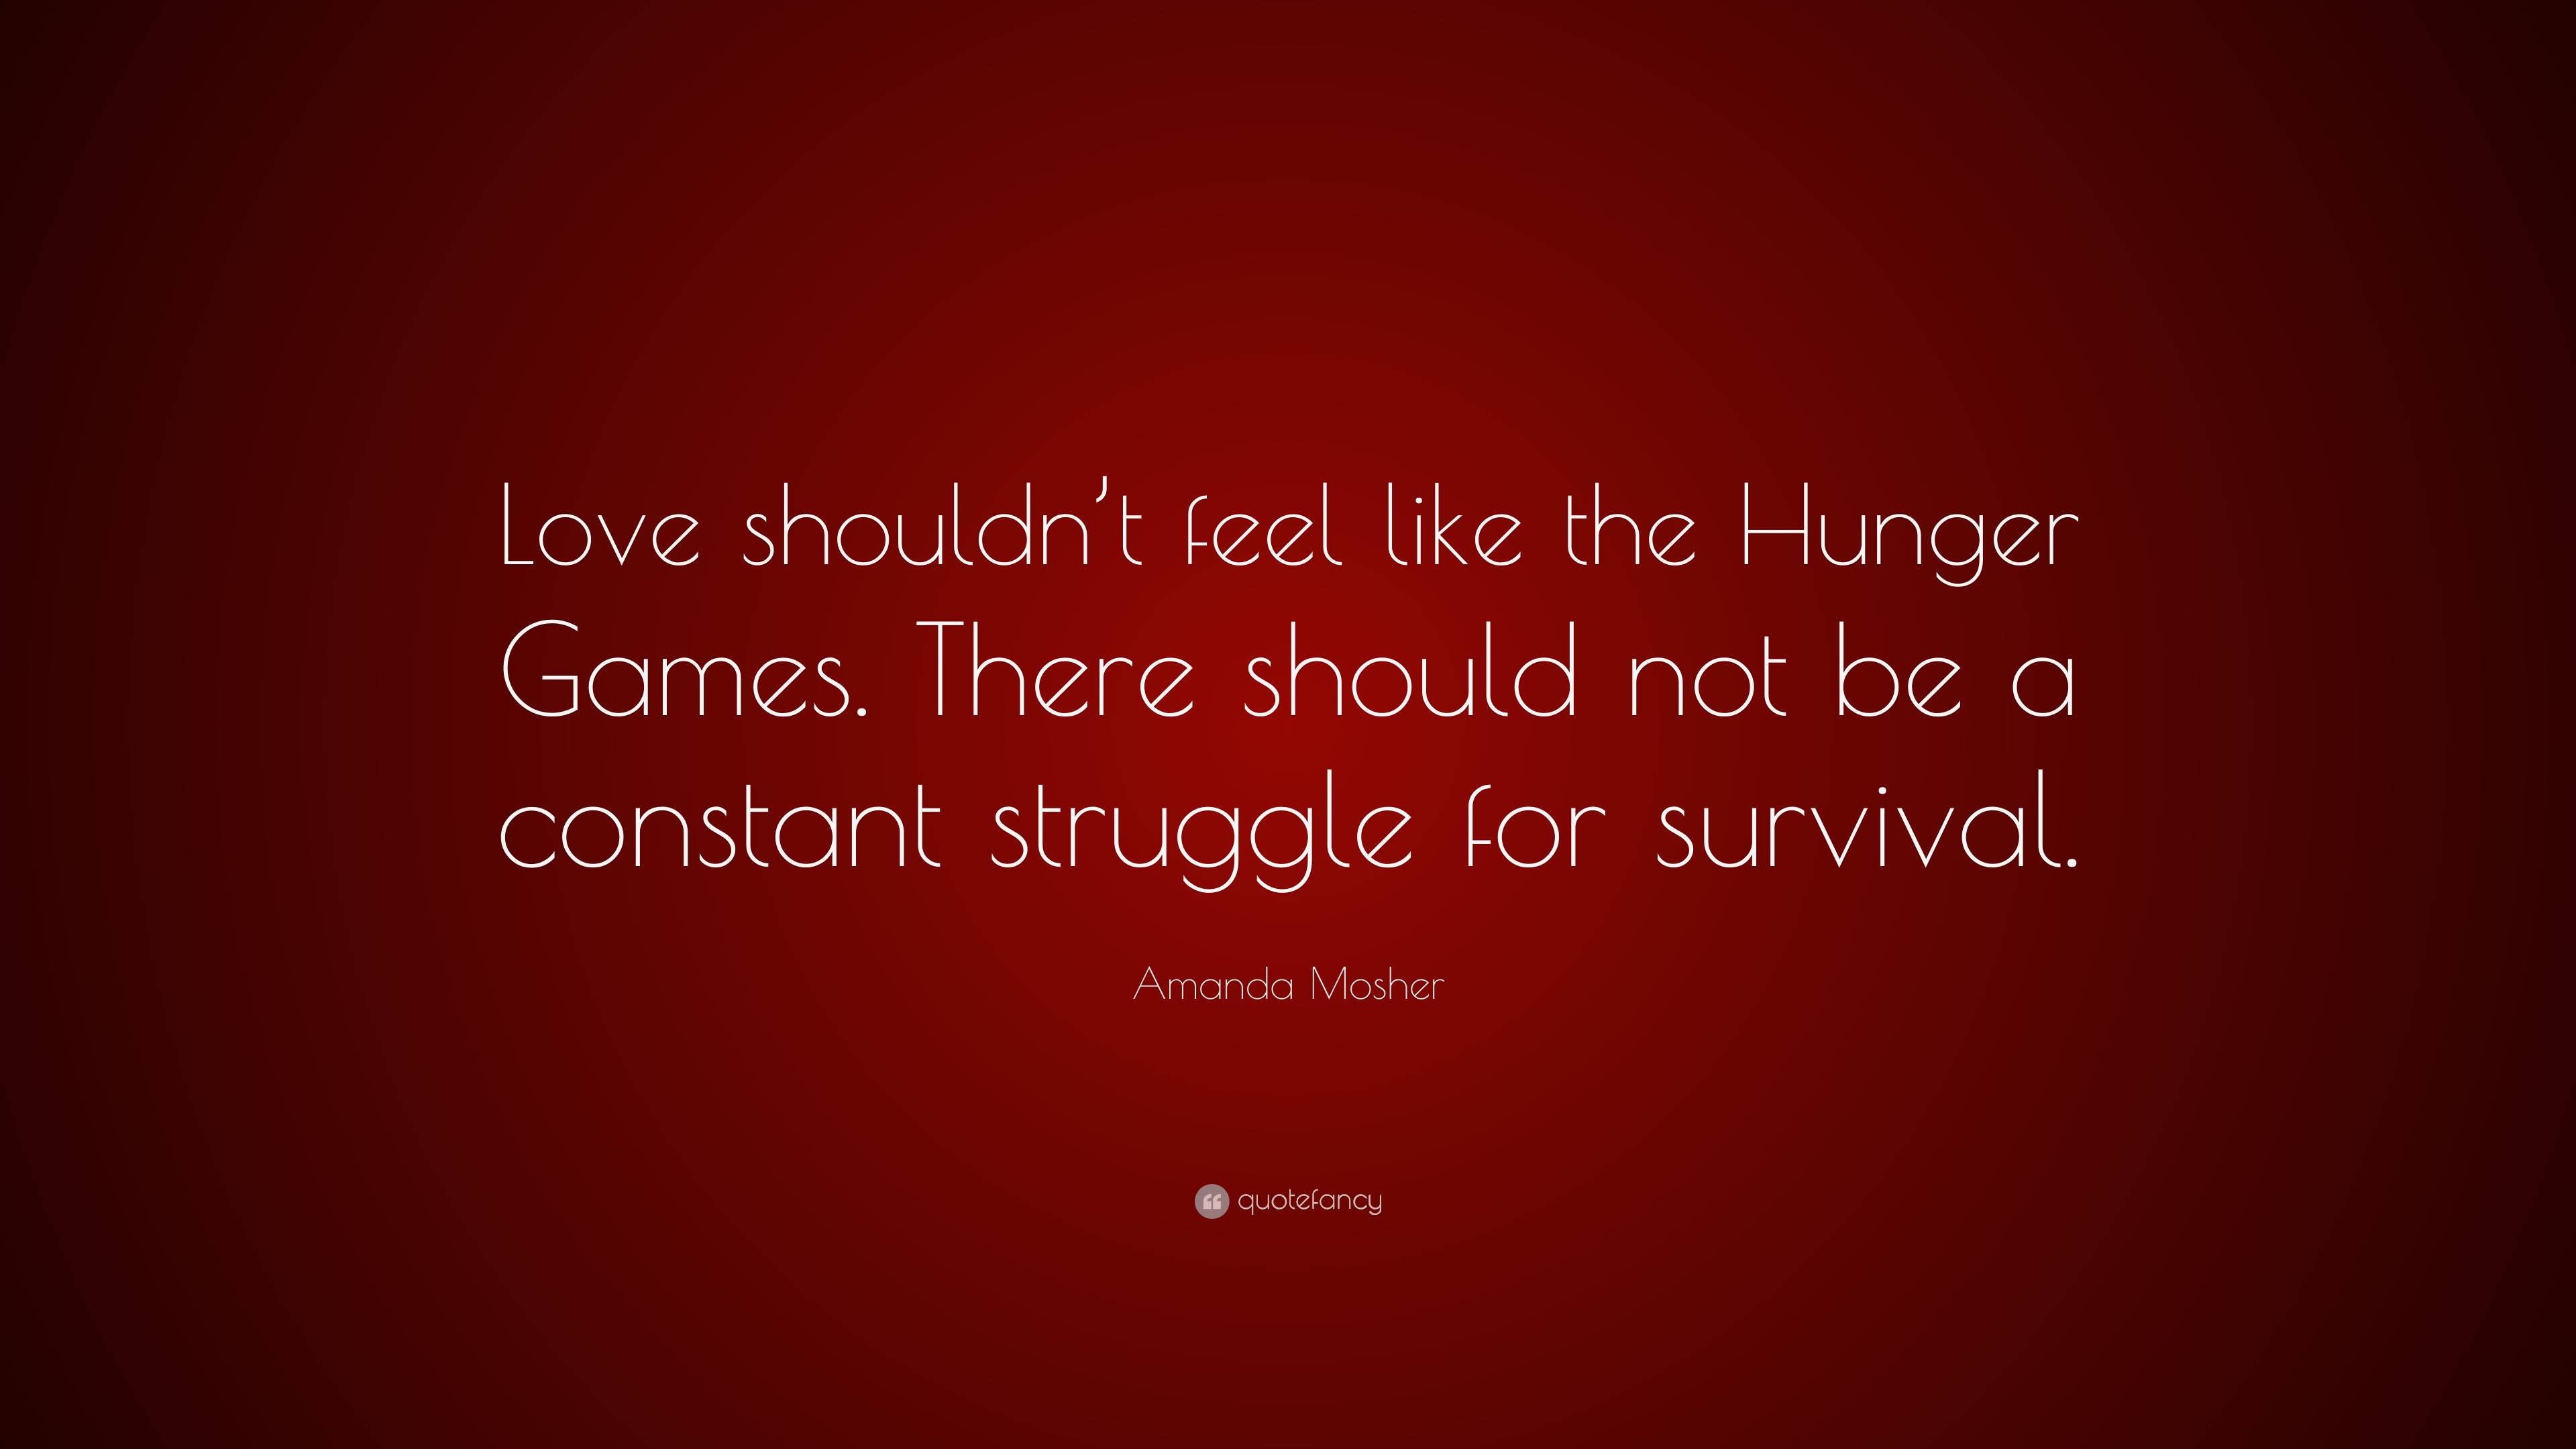 Hunger Games Quotes About Survival